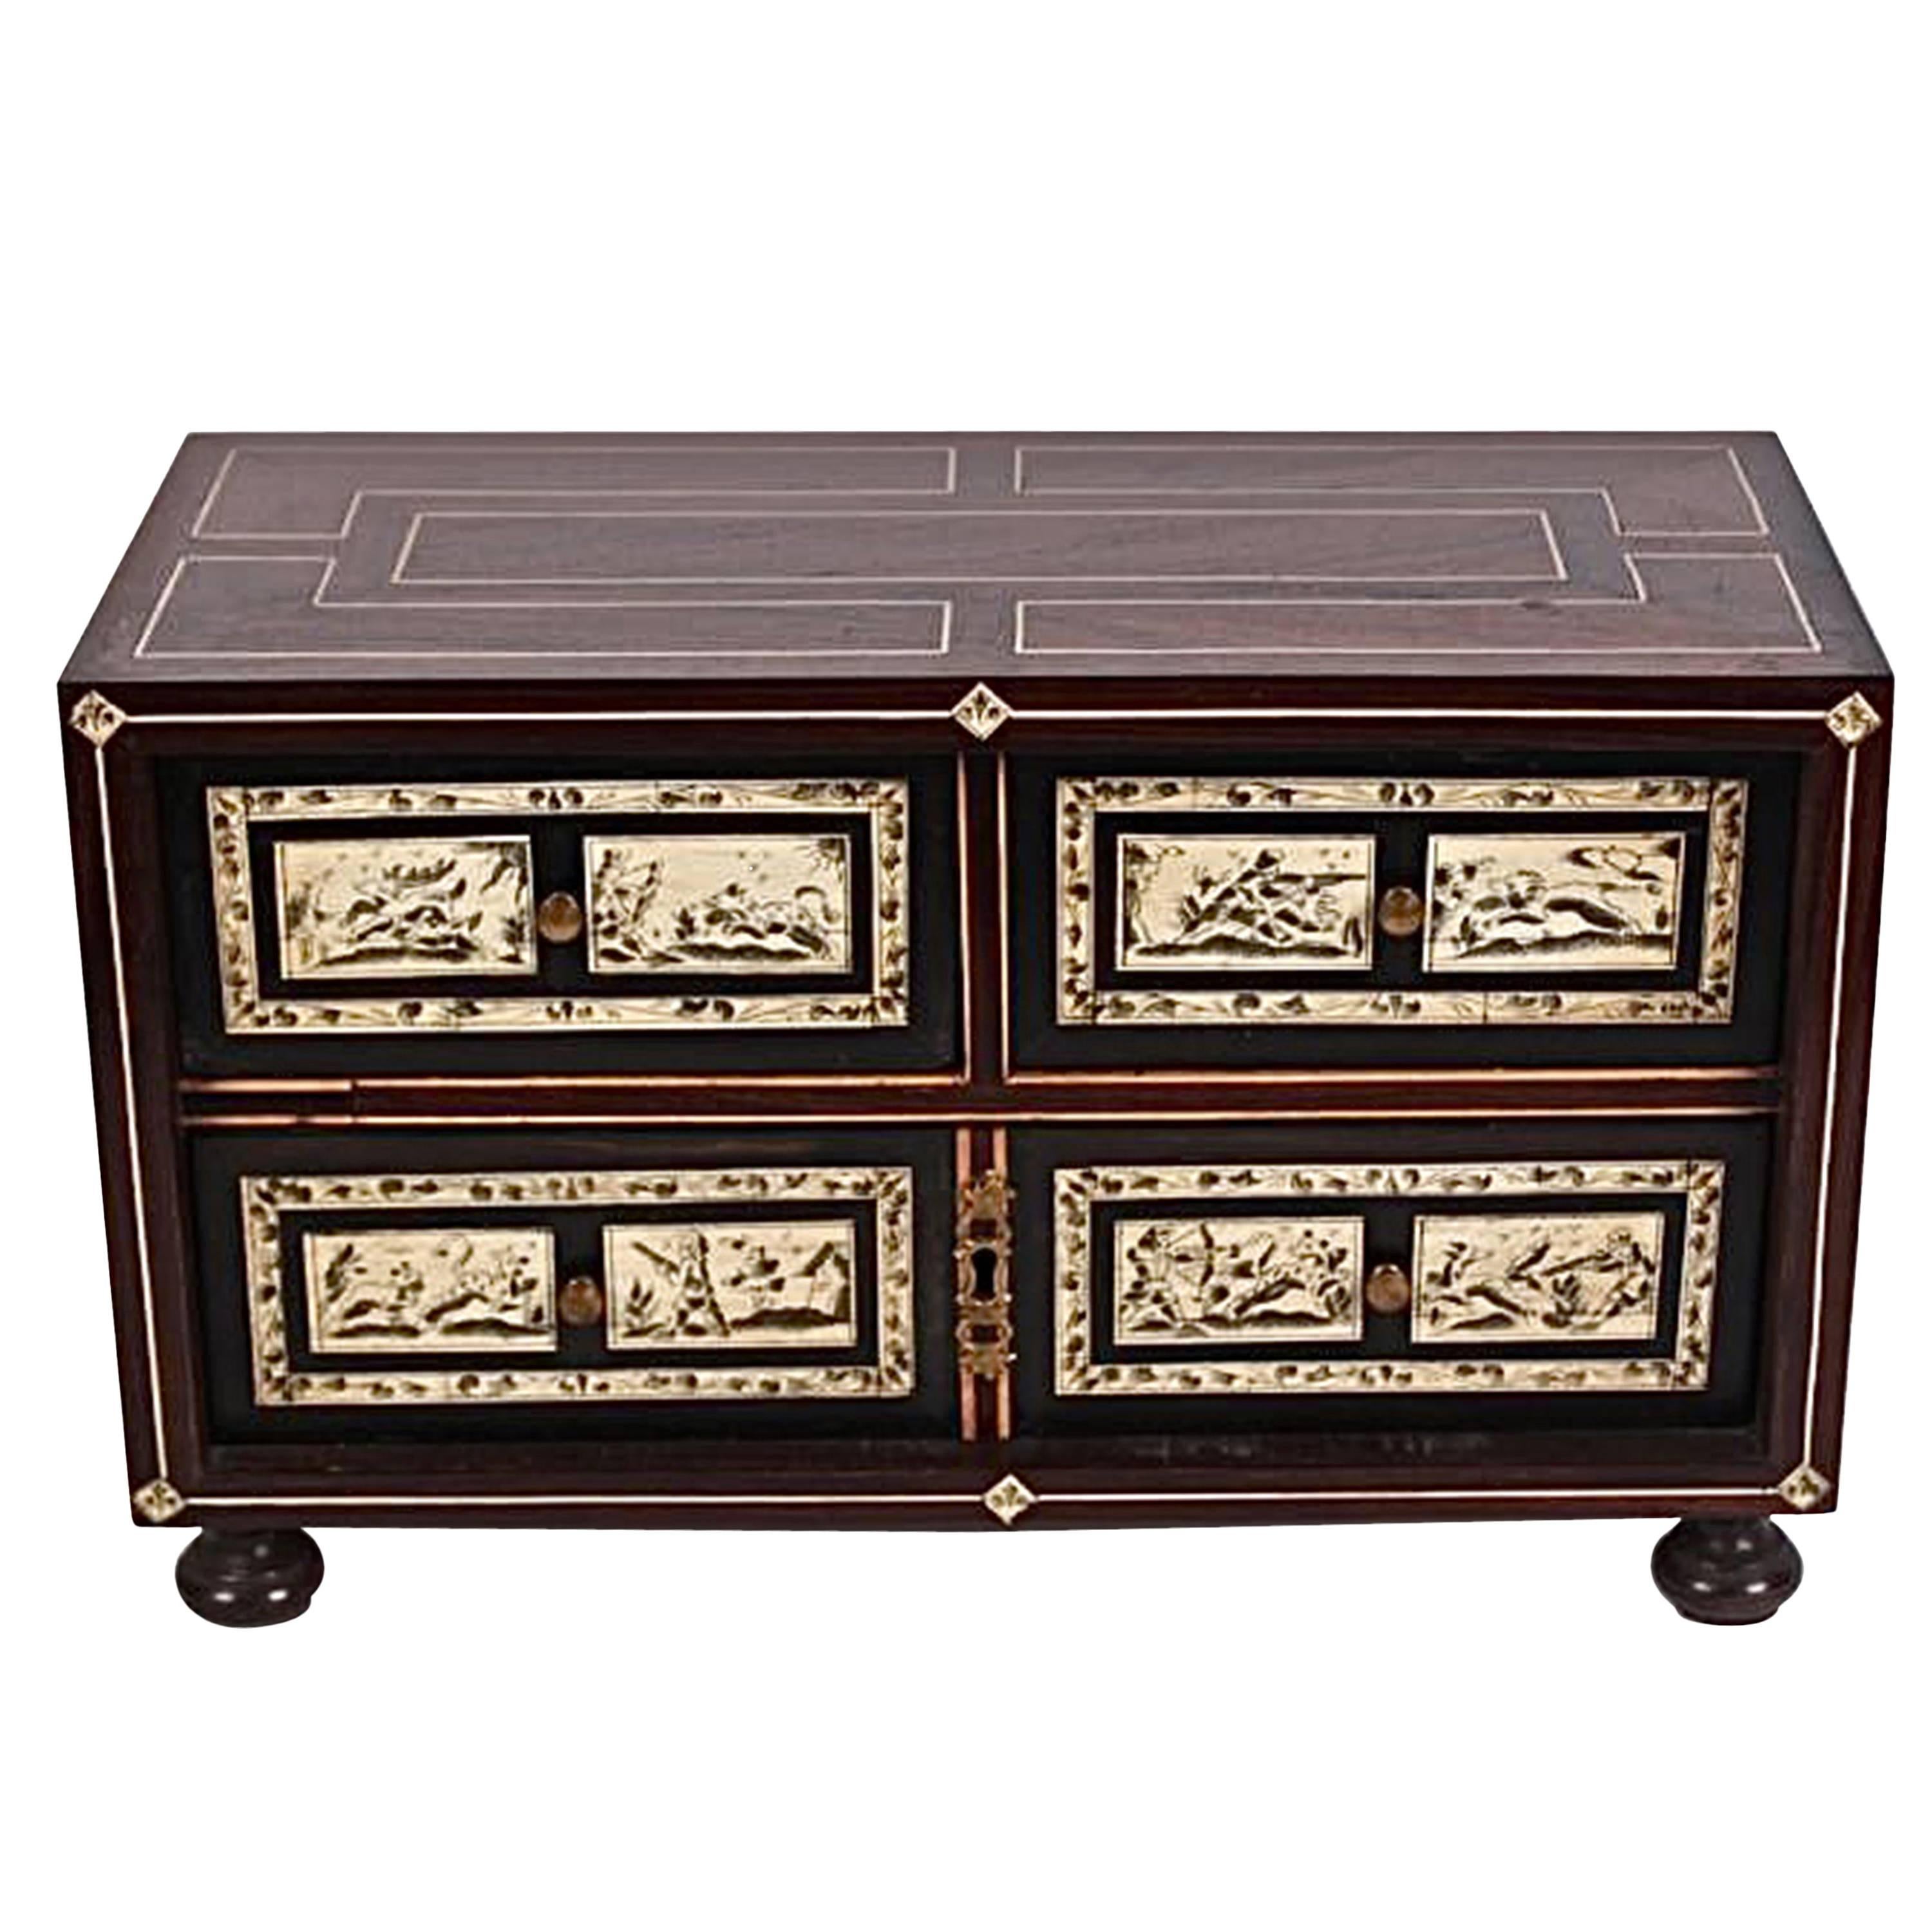 Neapolitan Parquetry Table Cabinet In Rosewood Mahogany Walnut And Bone For Sale At 1stdibs